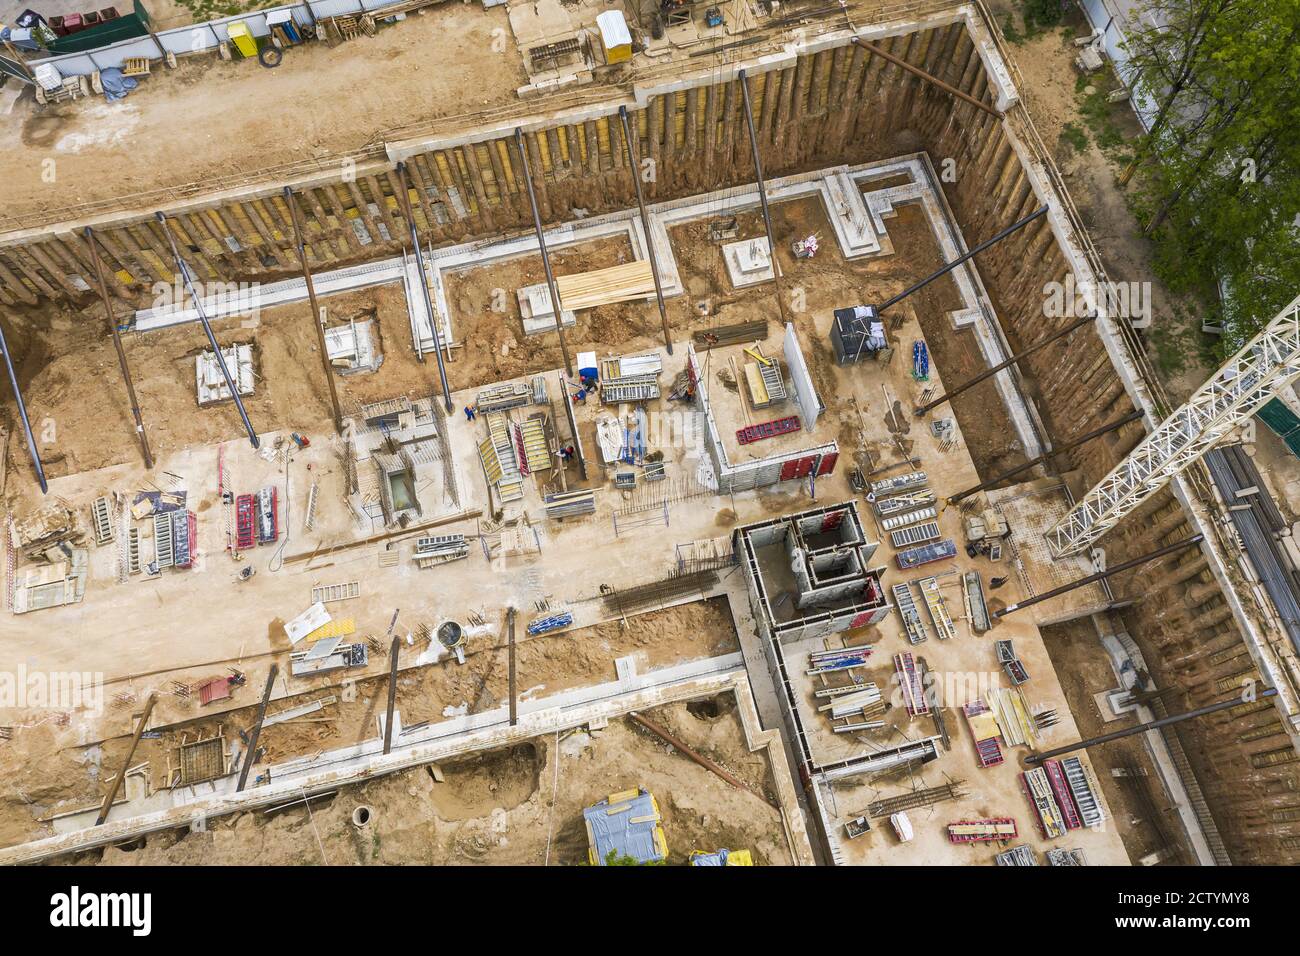 concrete foundations of future apartment building under construction. aerial view Stock Photo